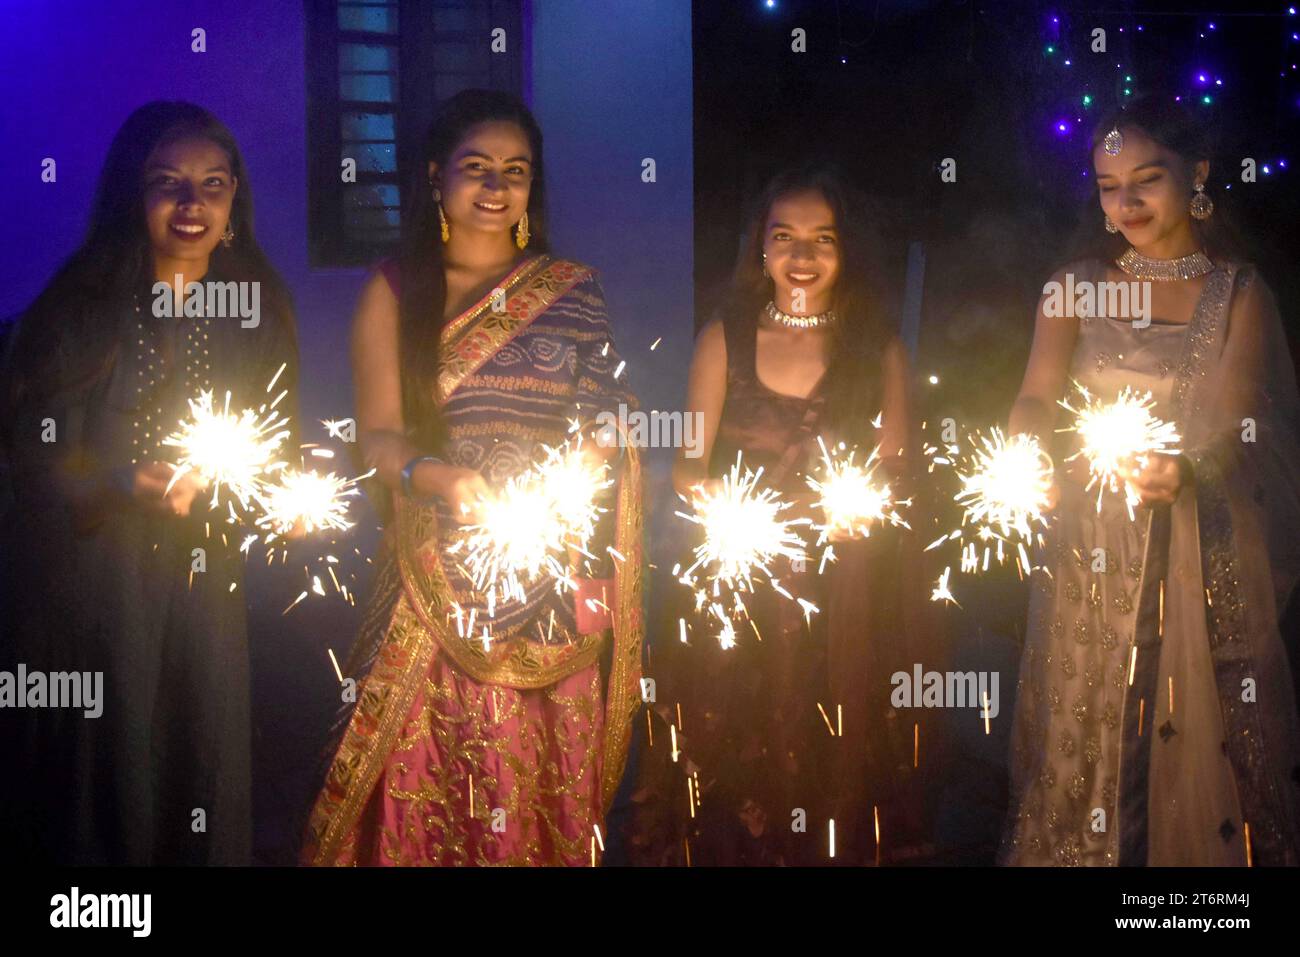 (231112) -- BHOPAL, Nov. 12, 2023 (Xinhua) -- Women play with firecrackers as they celebrate Diwali festival, also known as festival of lights, in Bhopal, India, Nov. 11, 2023. (Str/Xinhua) Stock Photo